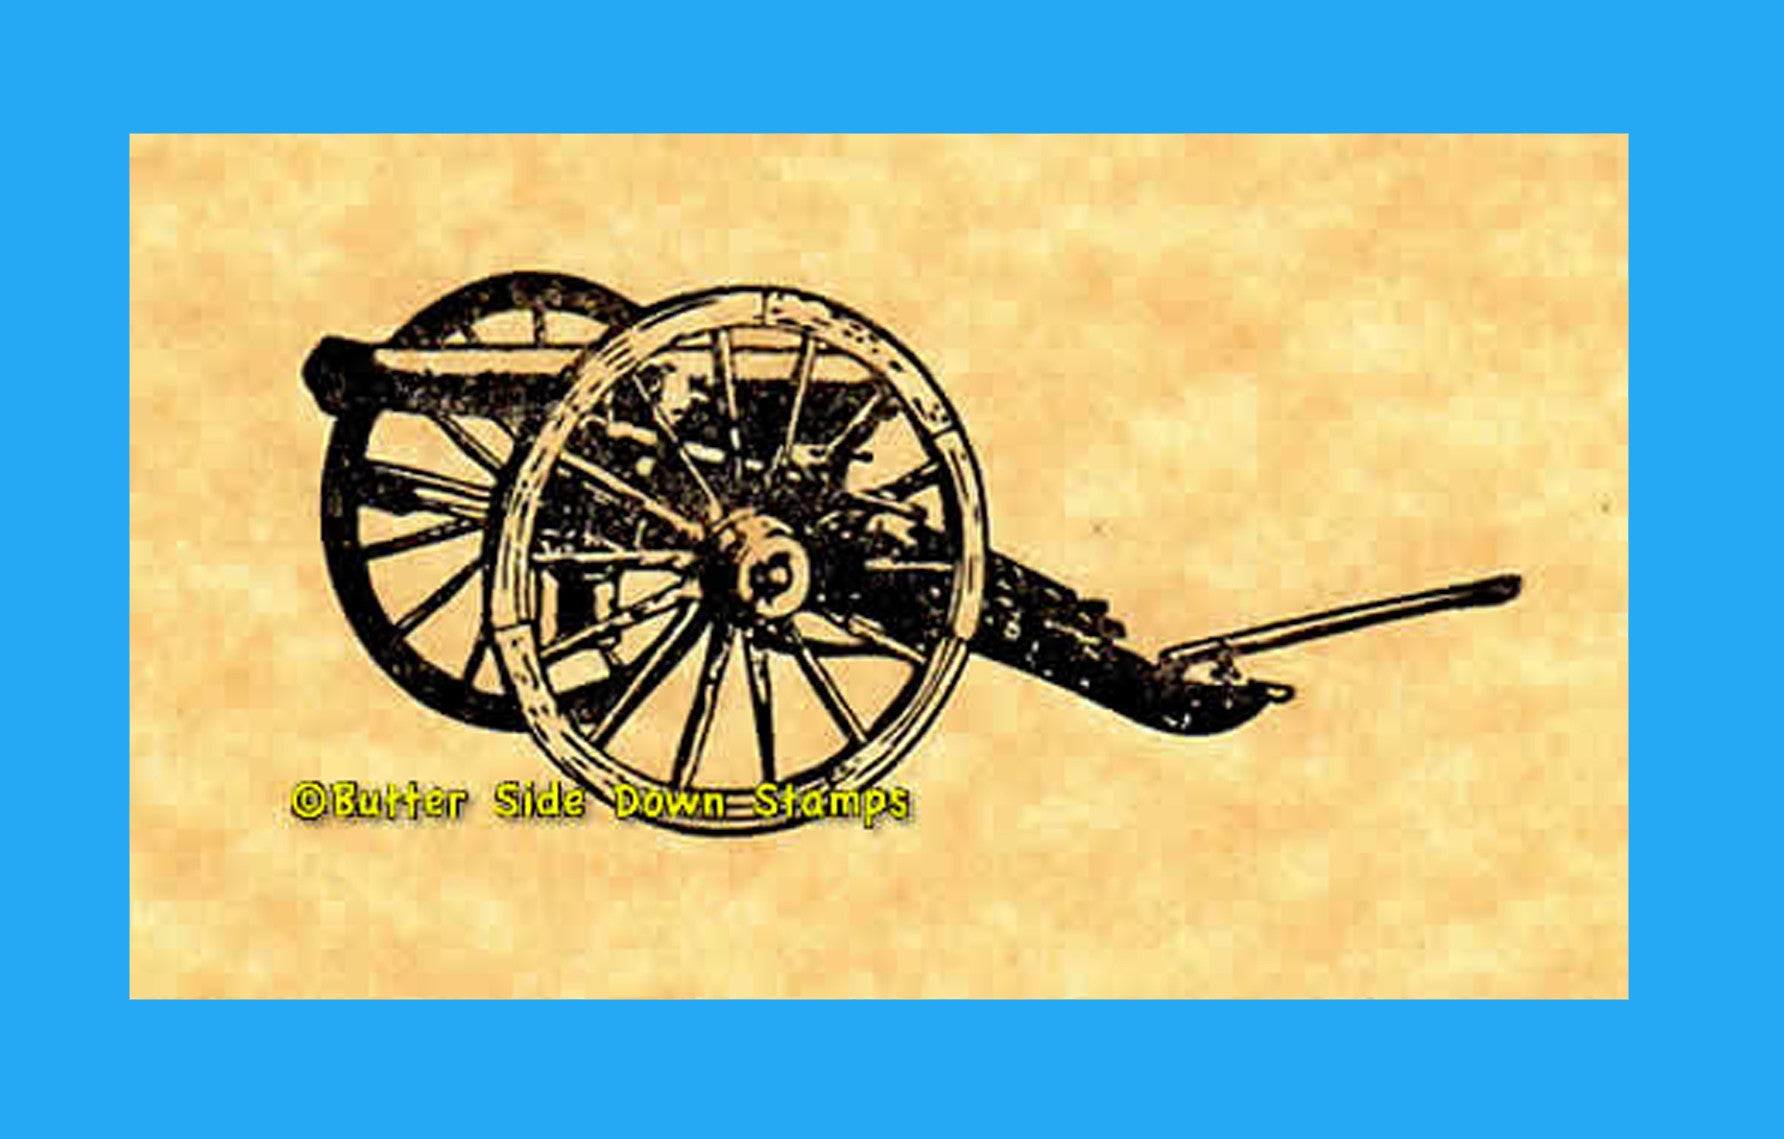 12-pounder Napoleon cannon field gun from the American Civil War rubber stamp.